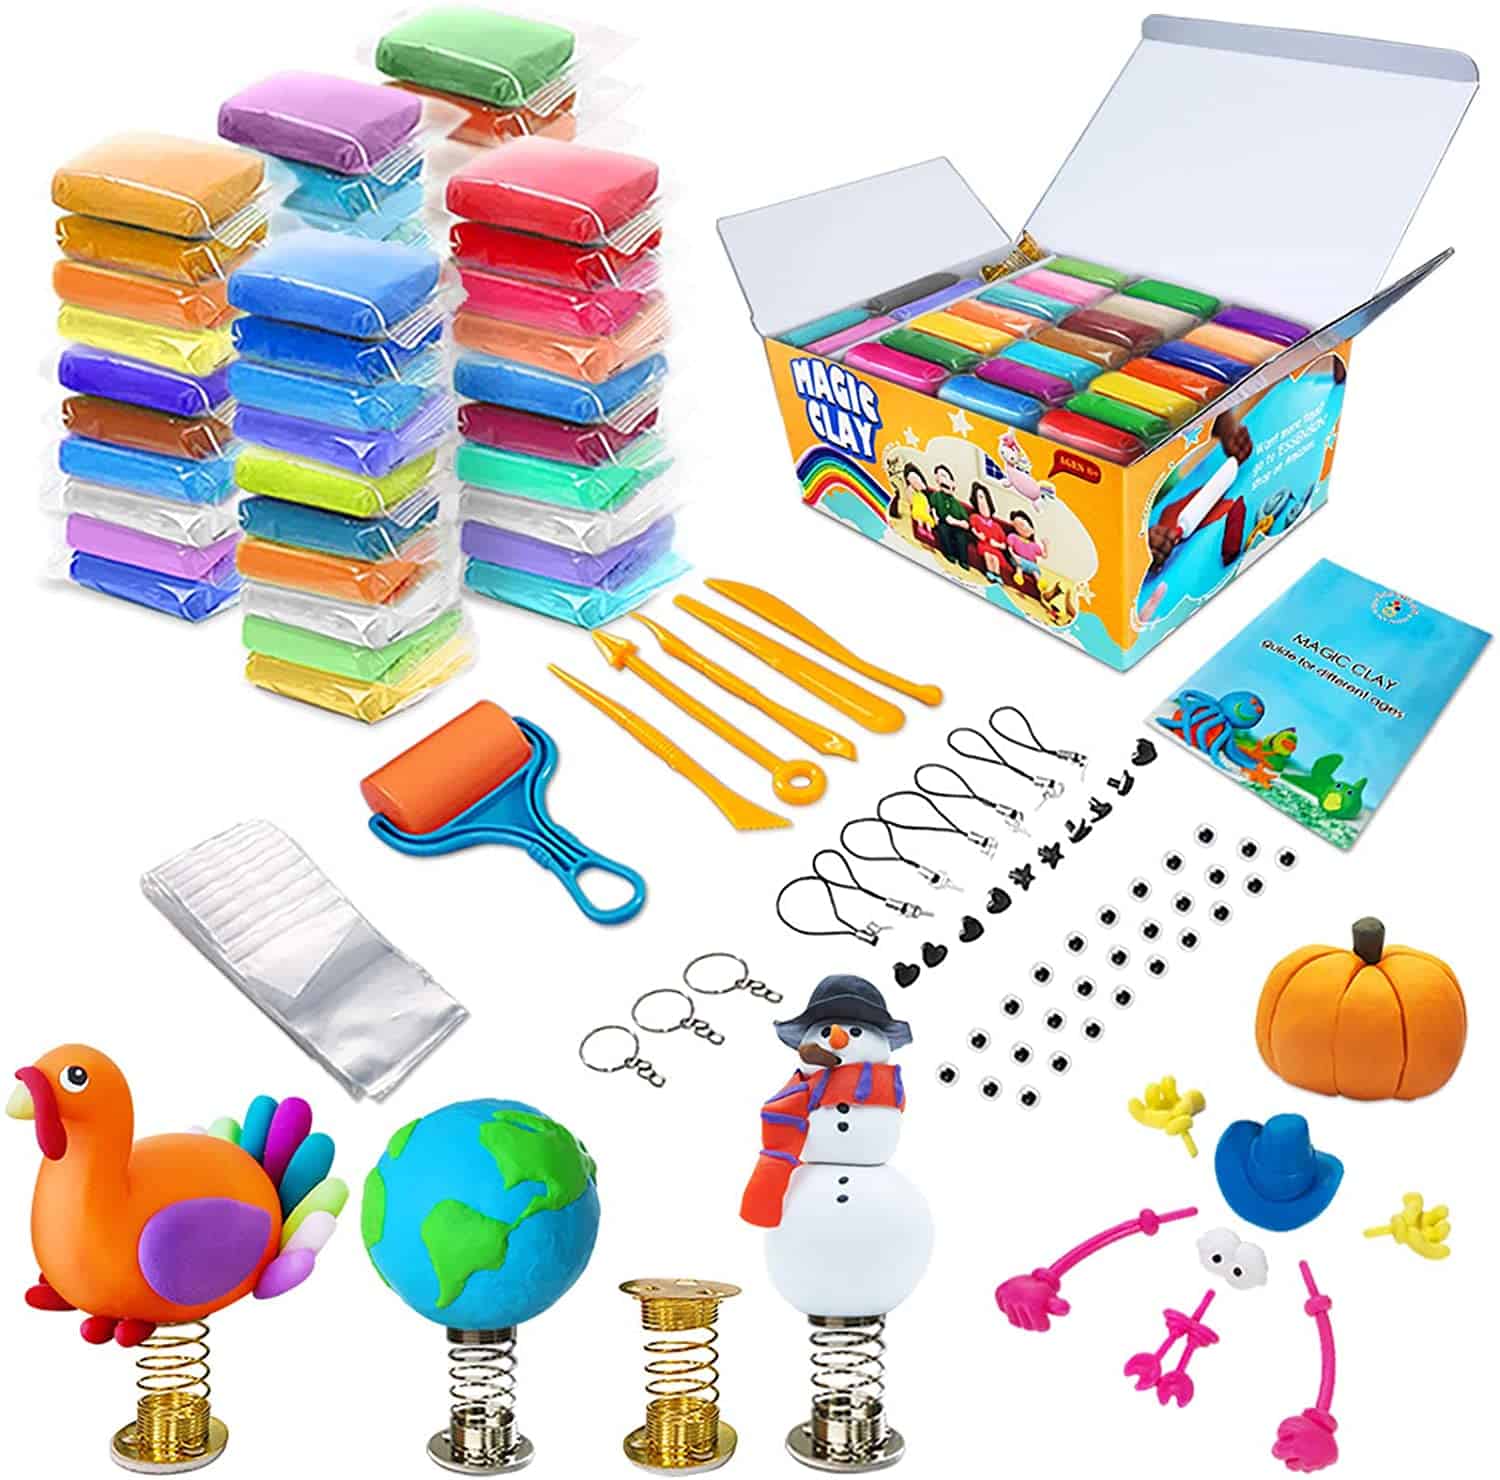 Best modeling clay kit for kids- ESSENSON Magic Clay with Tools and Accessories